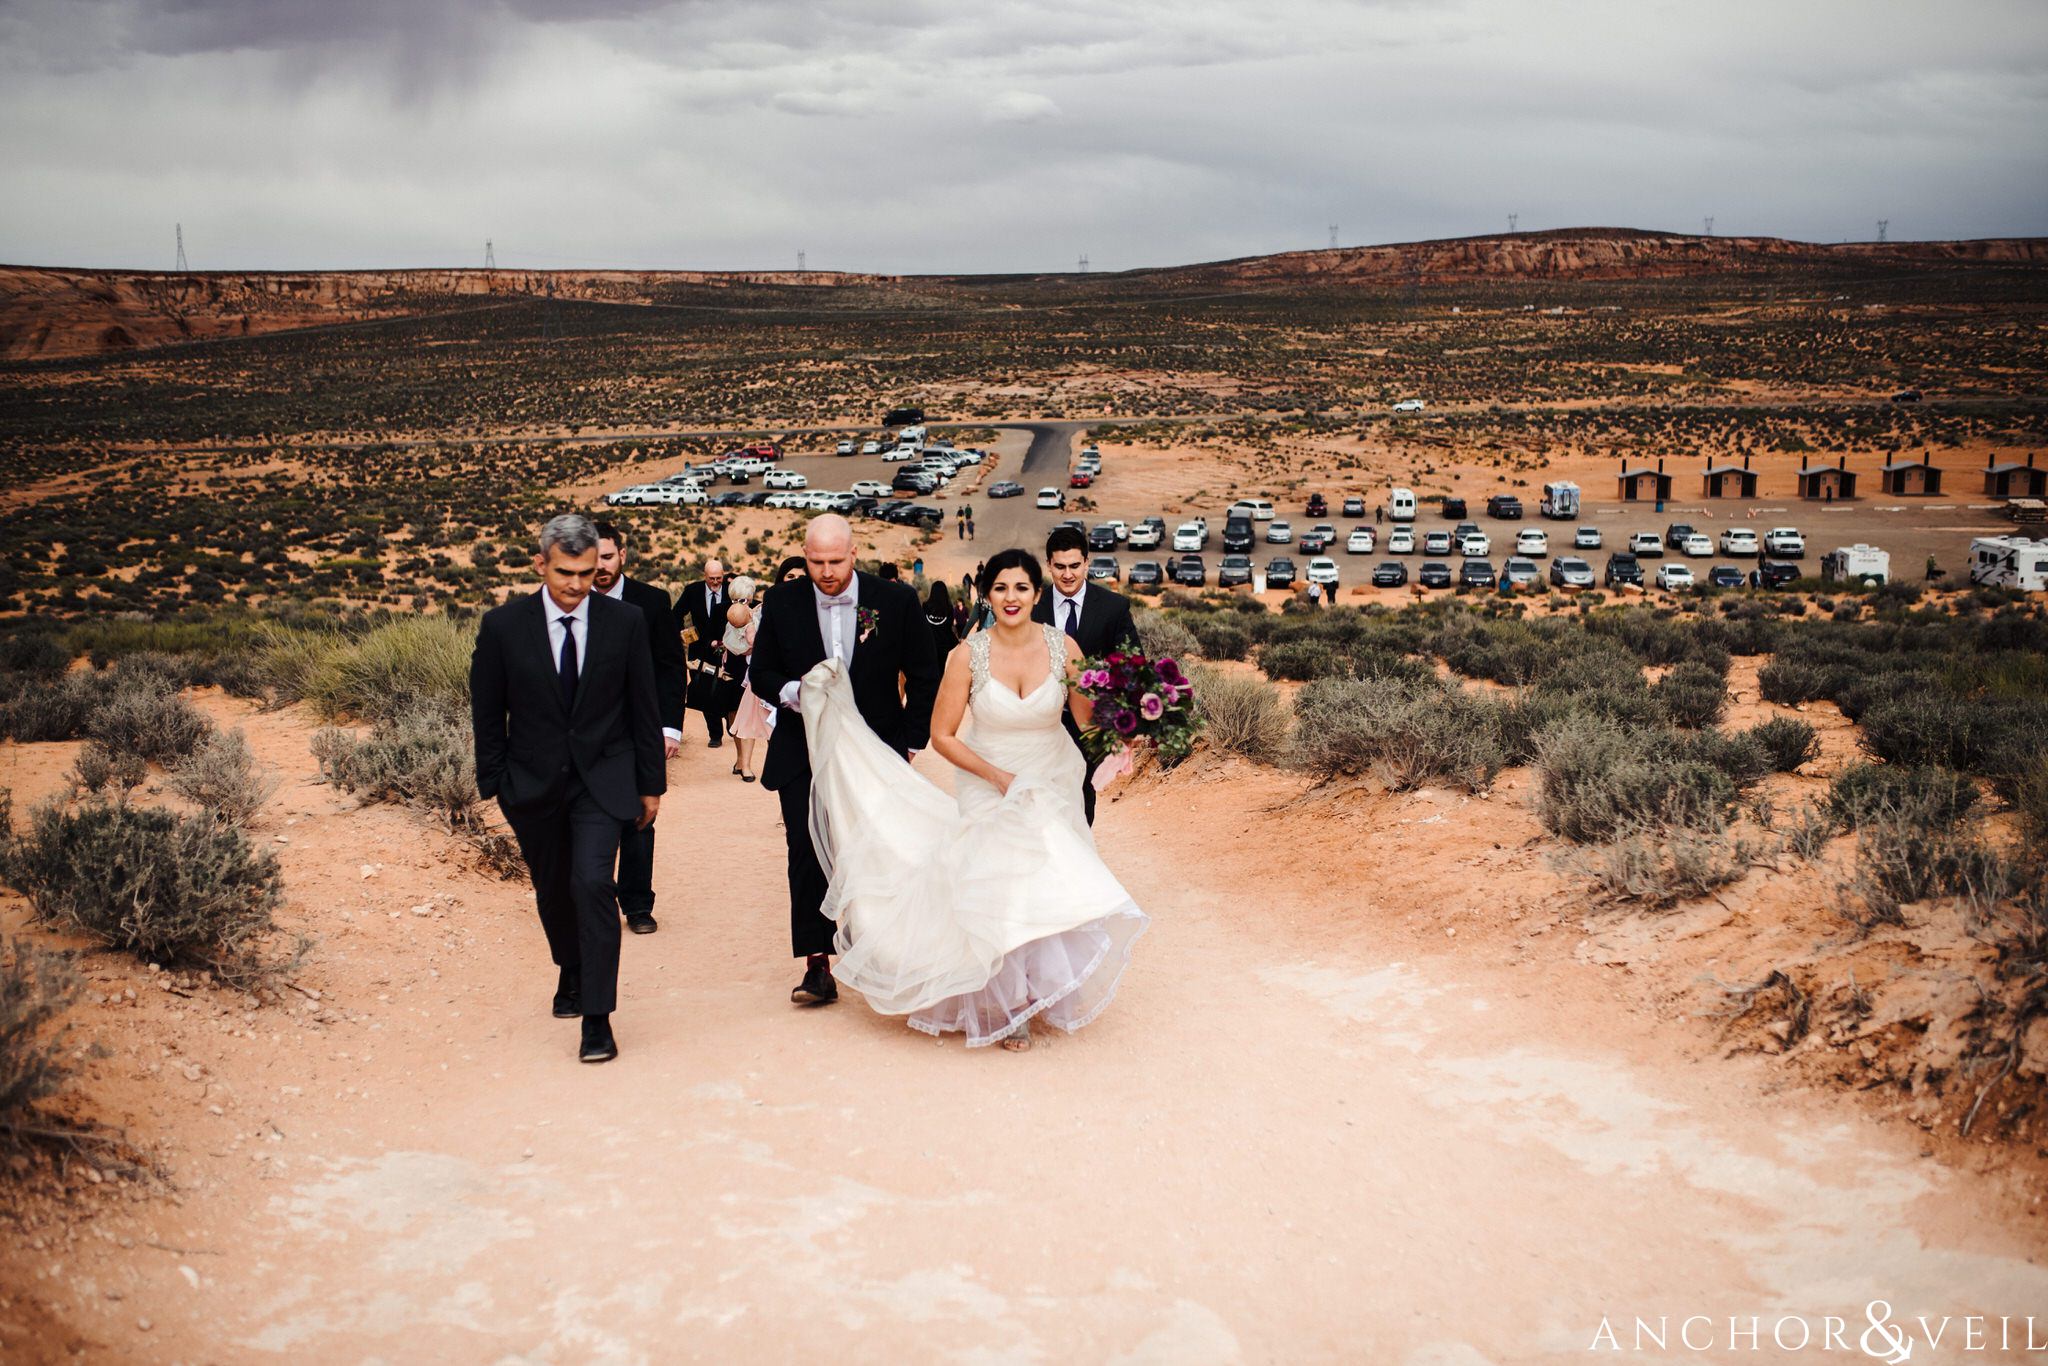 walking up the hill during their Horseshoe Bend Elopement Wedding